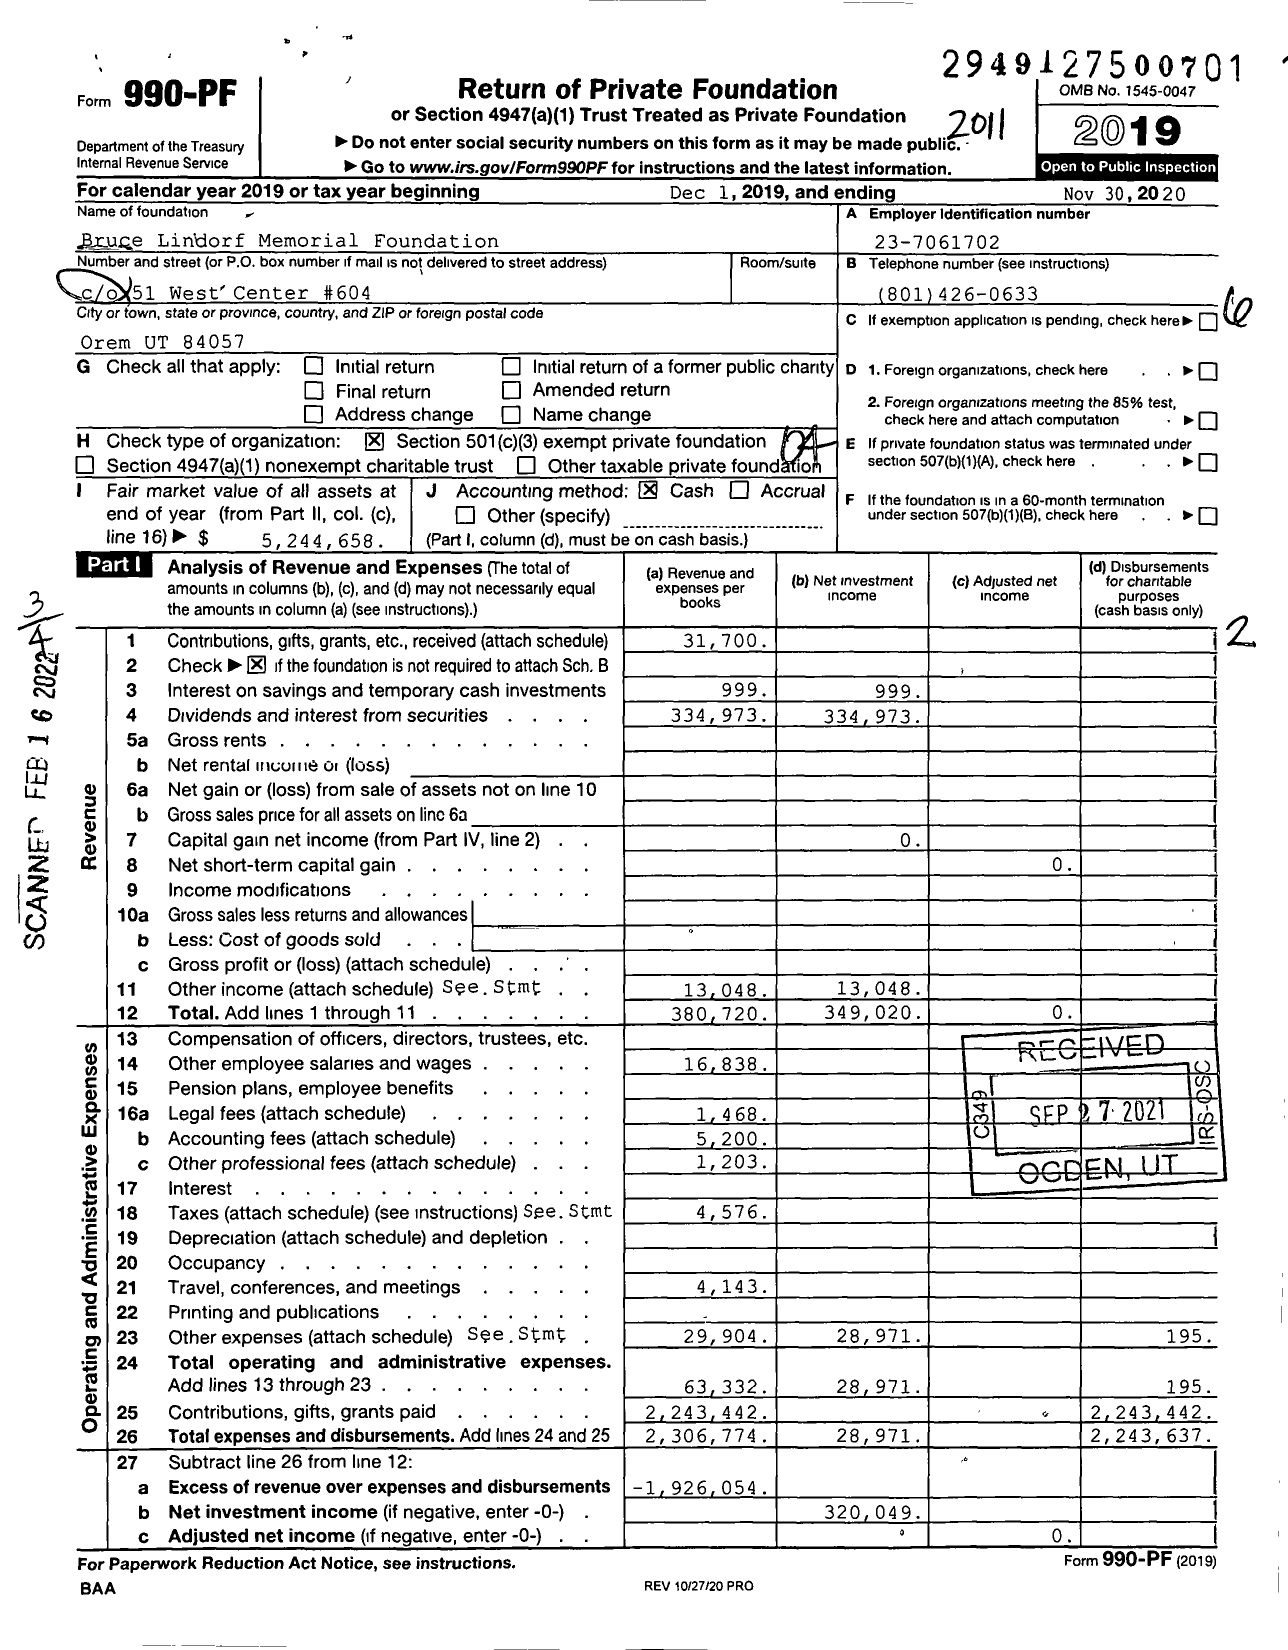 Image of first page of 2019 Form 990PF for Bruce Lindorf Memorial Foundation (BLMF)